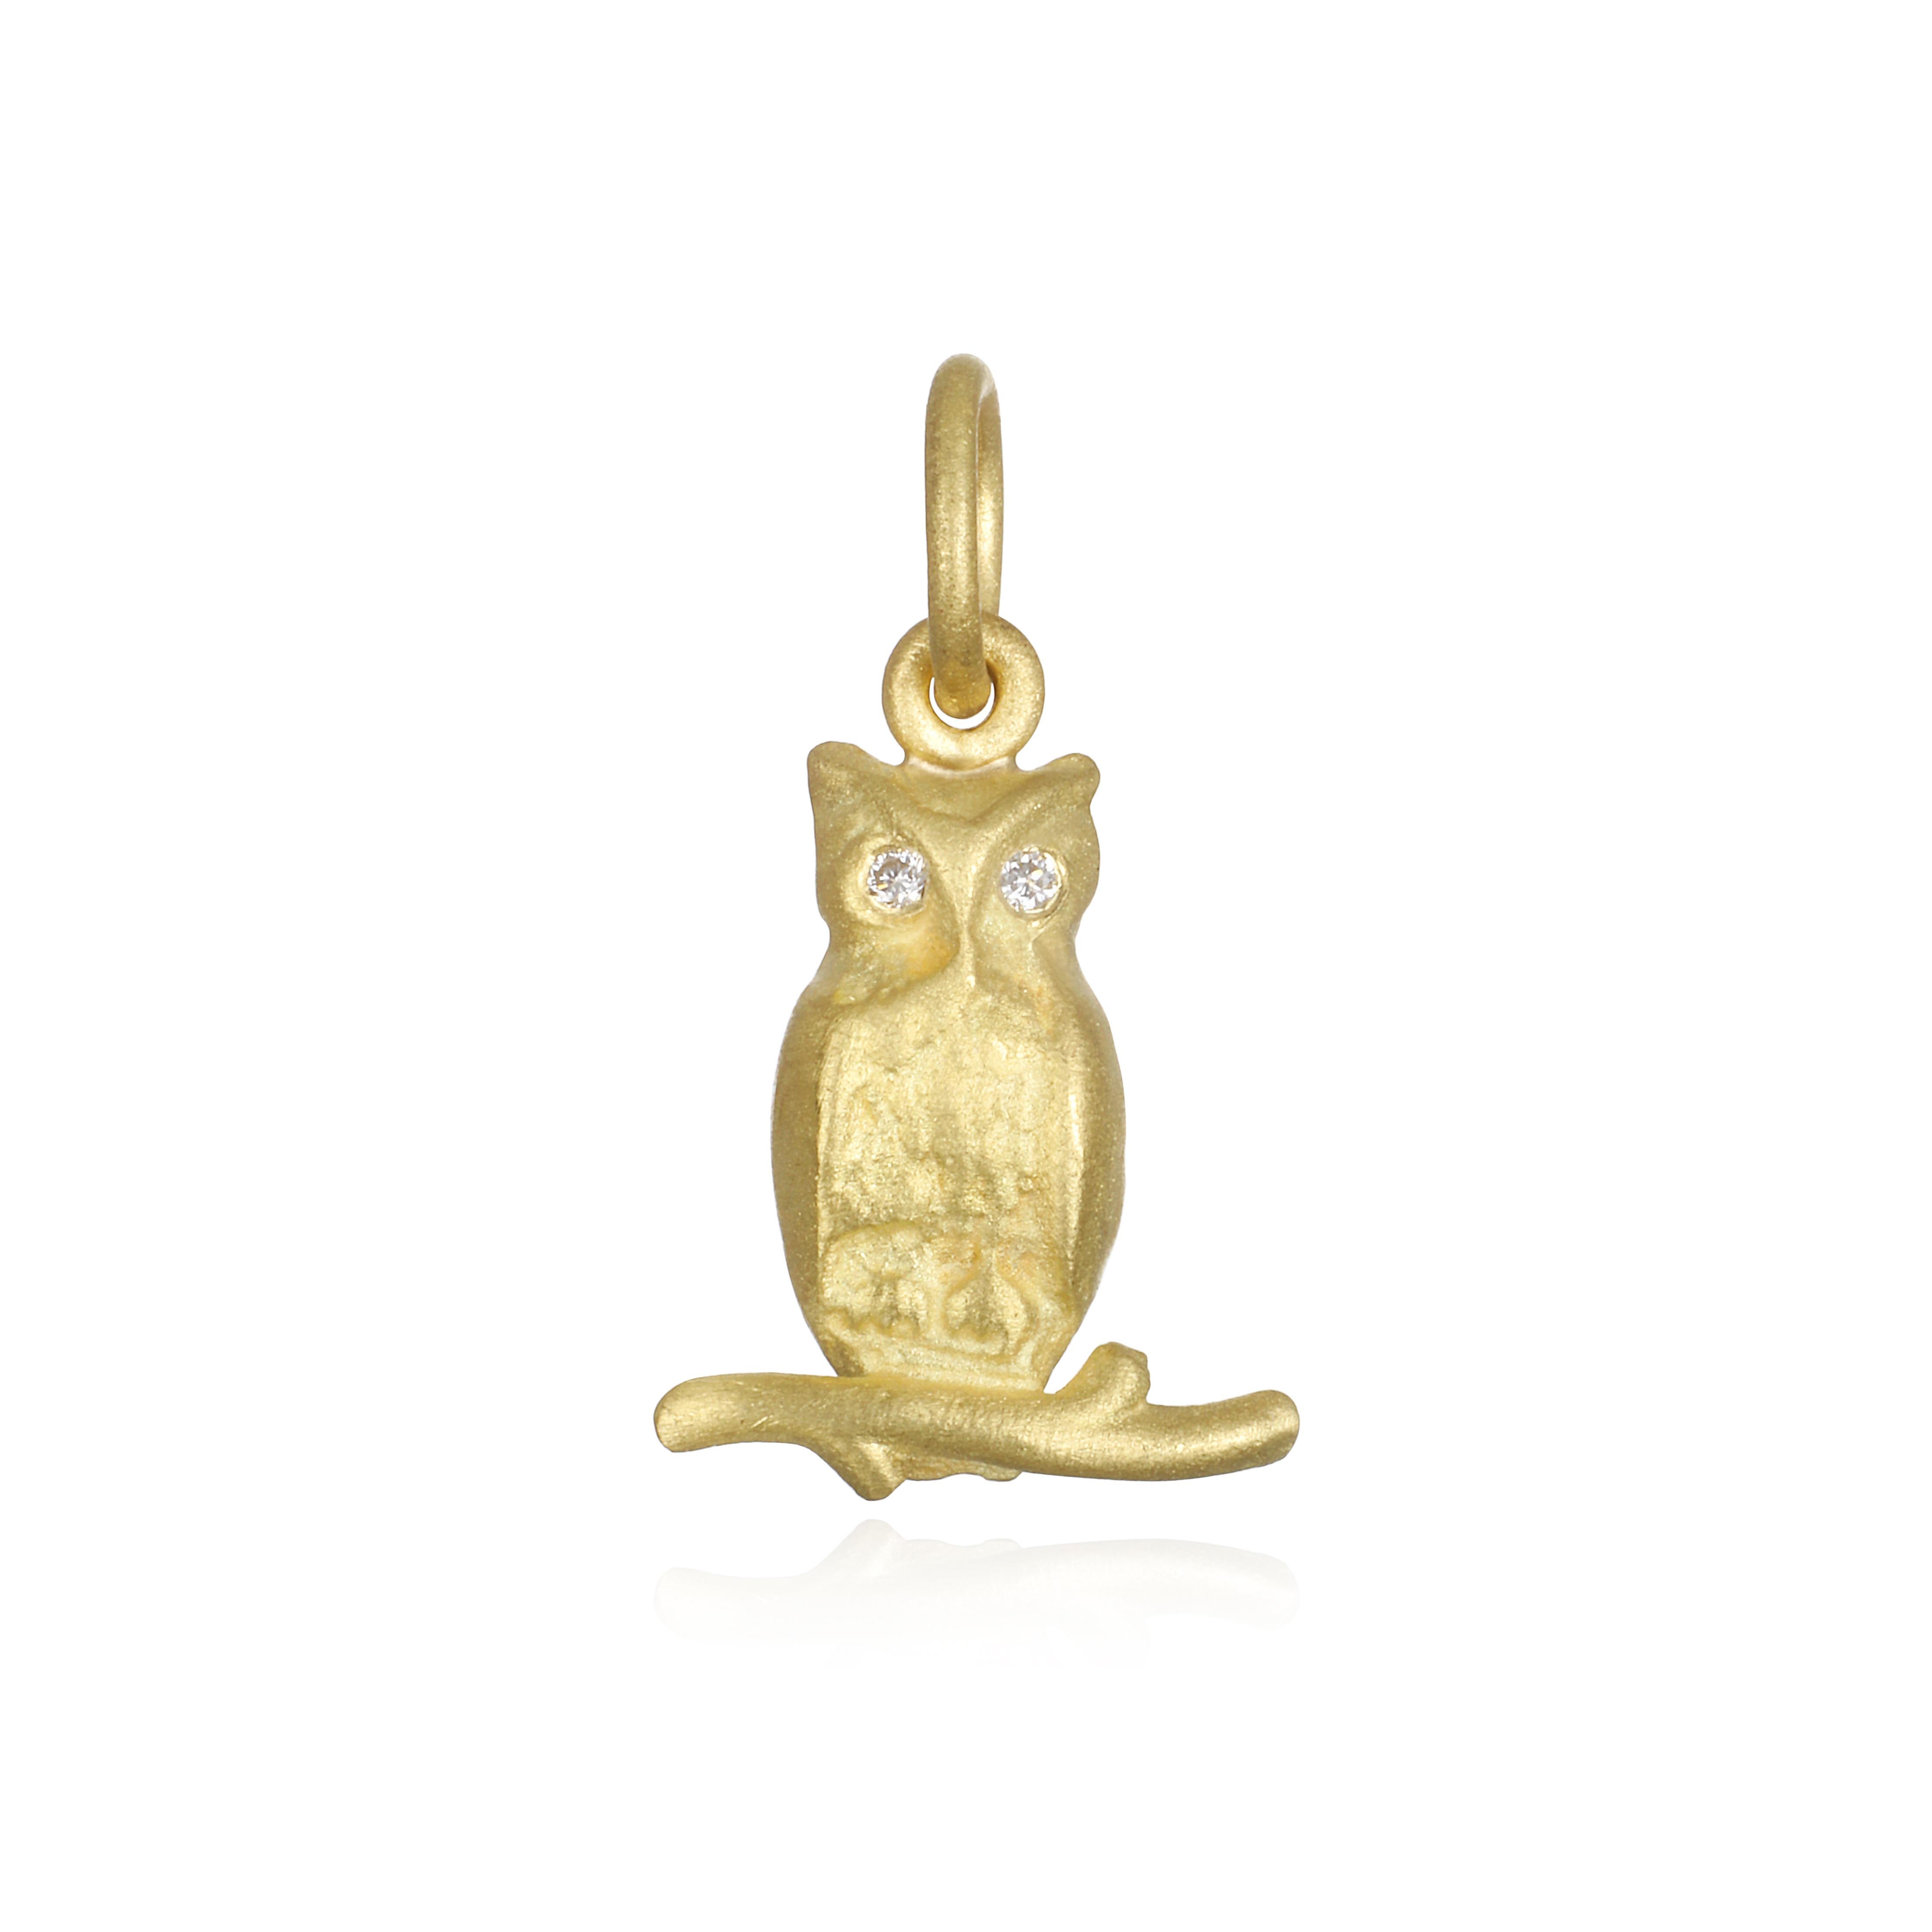 Symbolizing wisdom, truth, and knowledge, Faye Kim's 18k gold Owl with diamond eyes, perched on a branch is beautiful, wise and charming!

Owl Length x Width:  .6